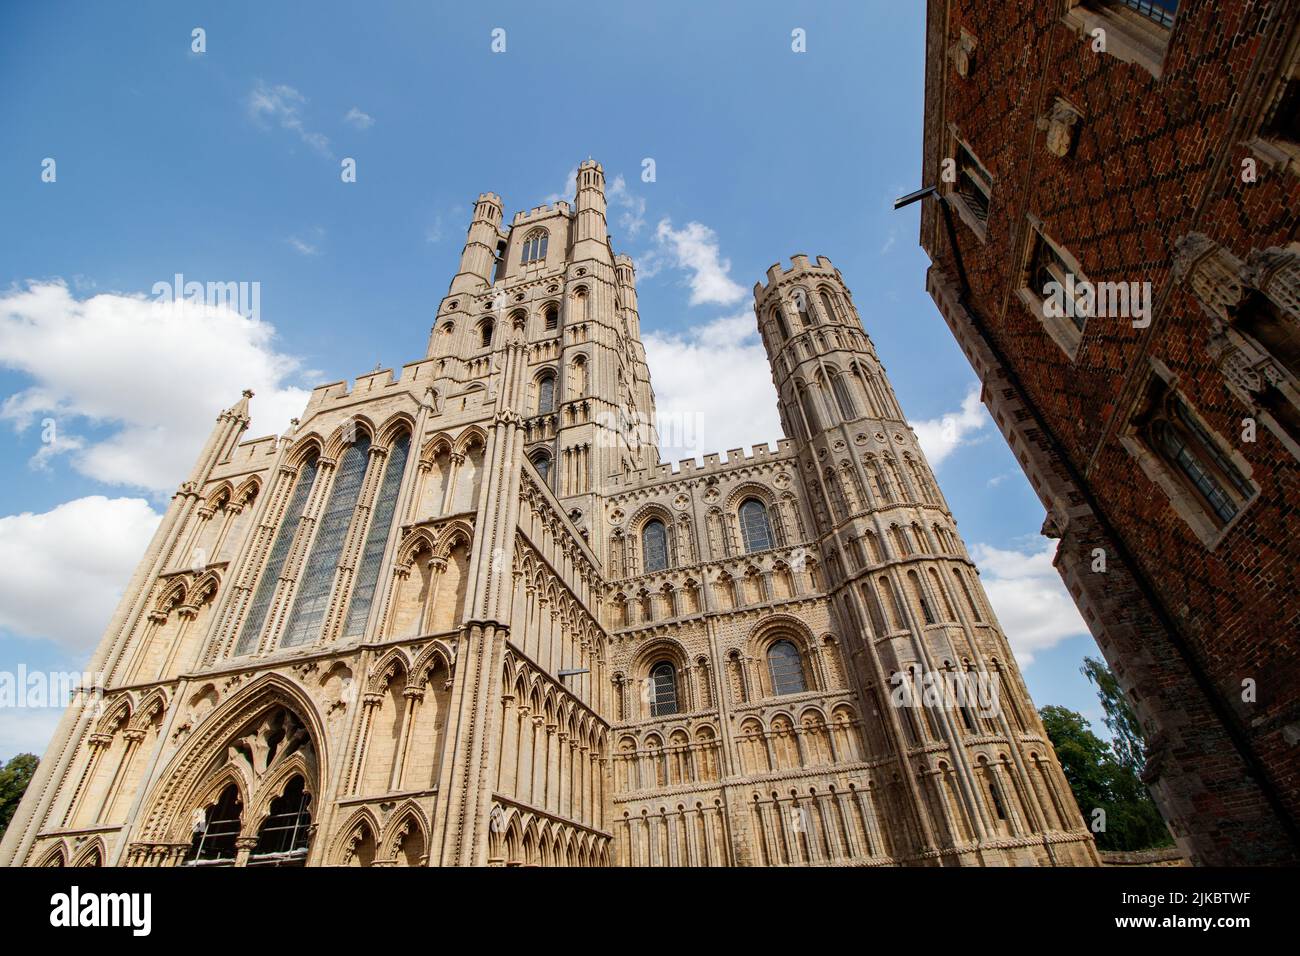 Ely Cathedral in Cambridgeshire. Picture taken in the summer month of July. Stock Photo